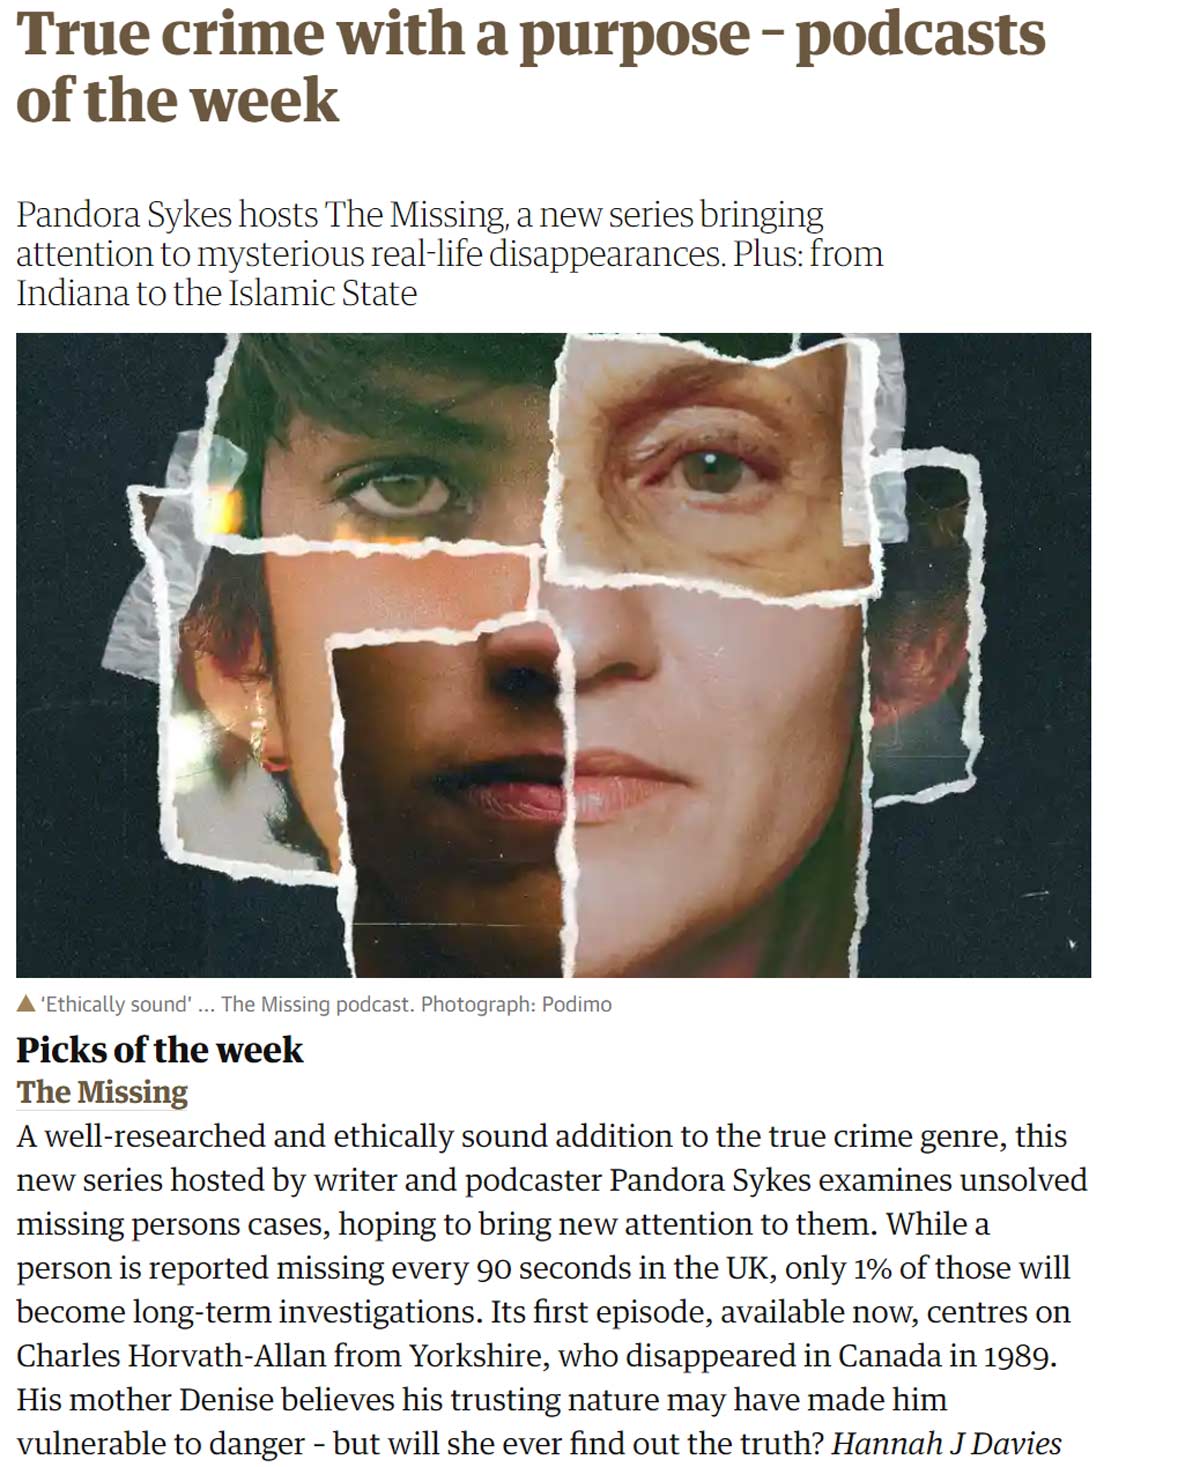 Guardian pick of the week